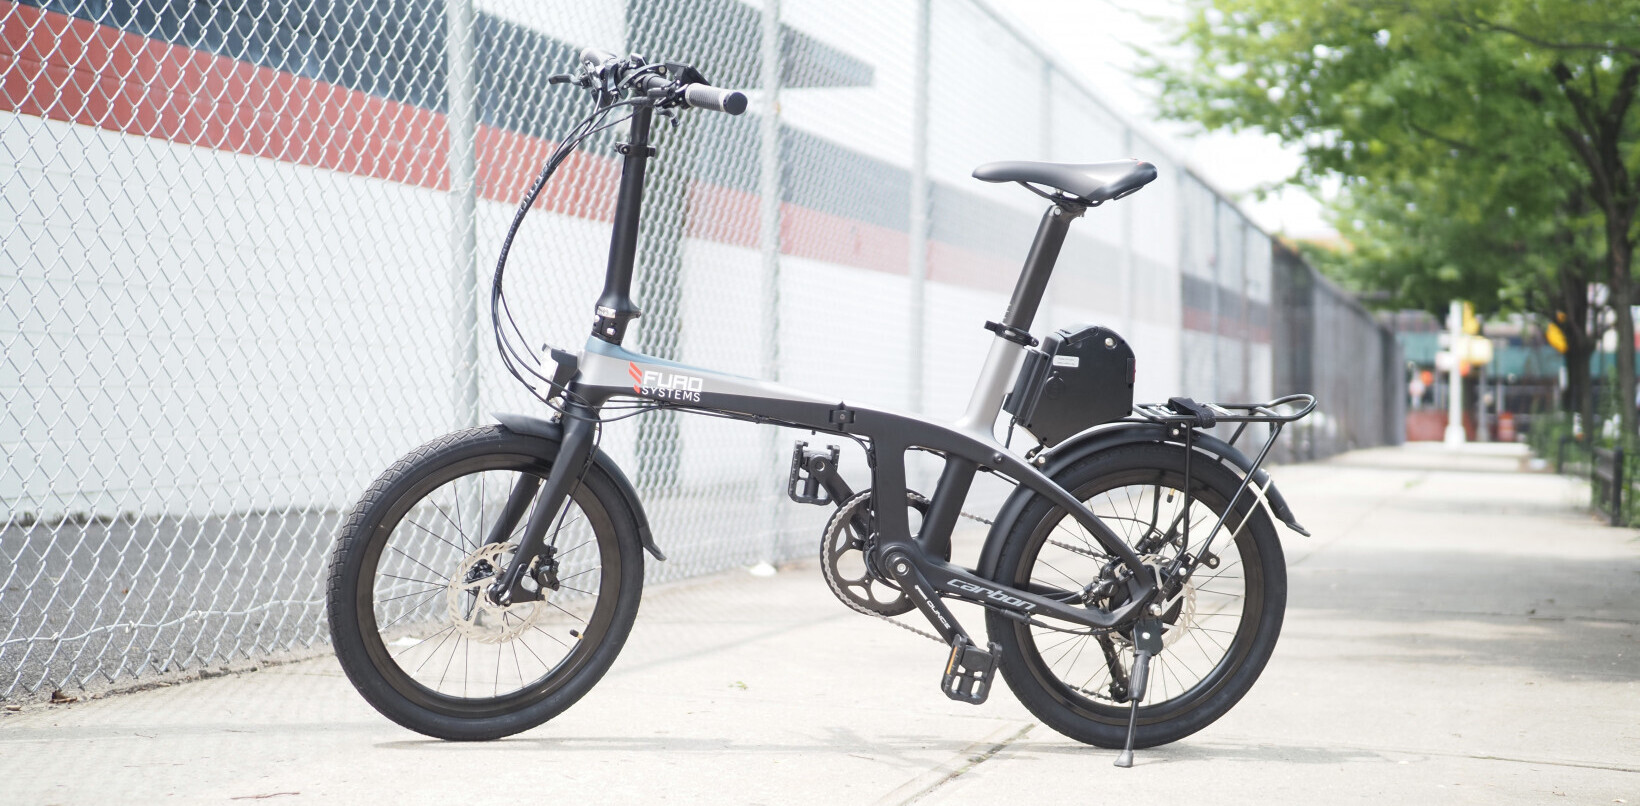 Furo X review: A carbon fiber folding ebike for weight weenies